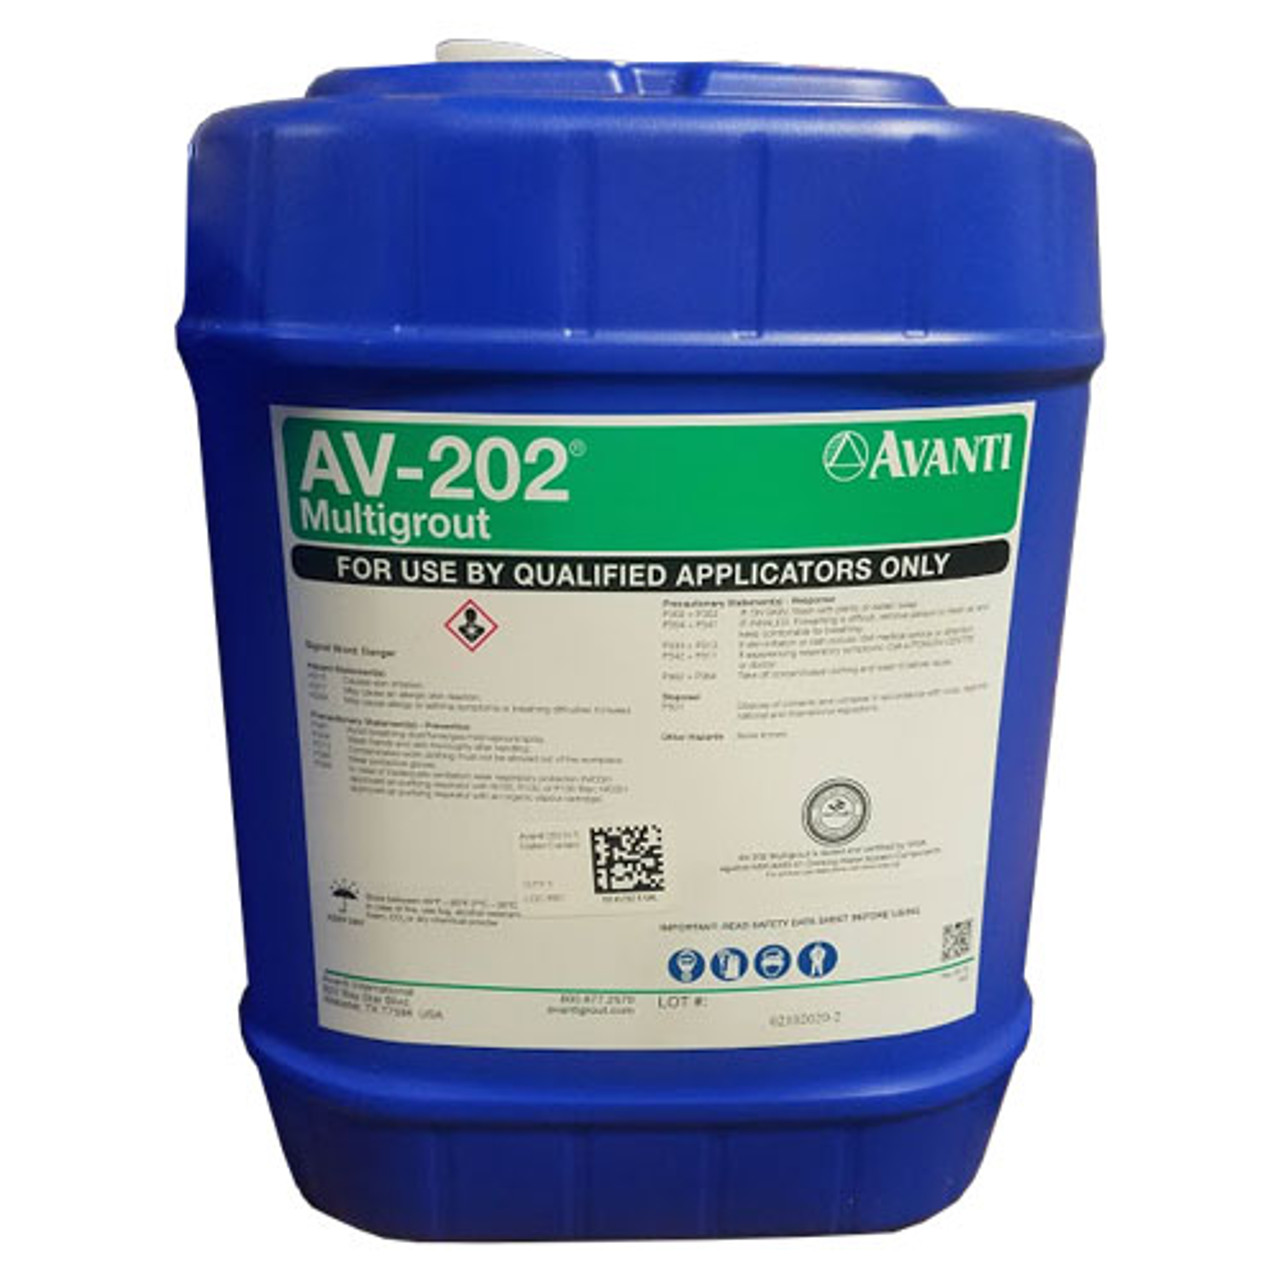 AV-202 Multigrout is a single component, moisture activated MDI/TDI blended polyurethane injection resin.